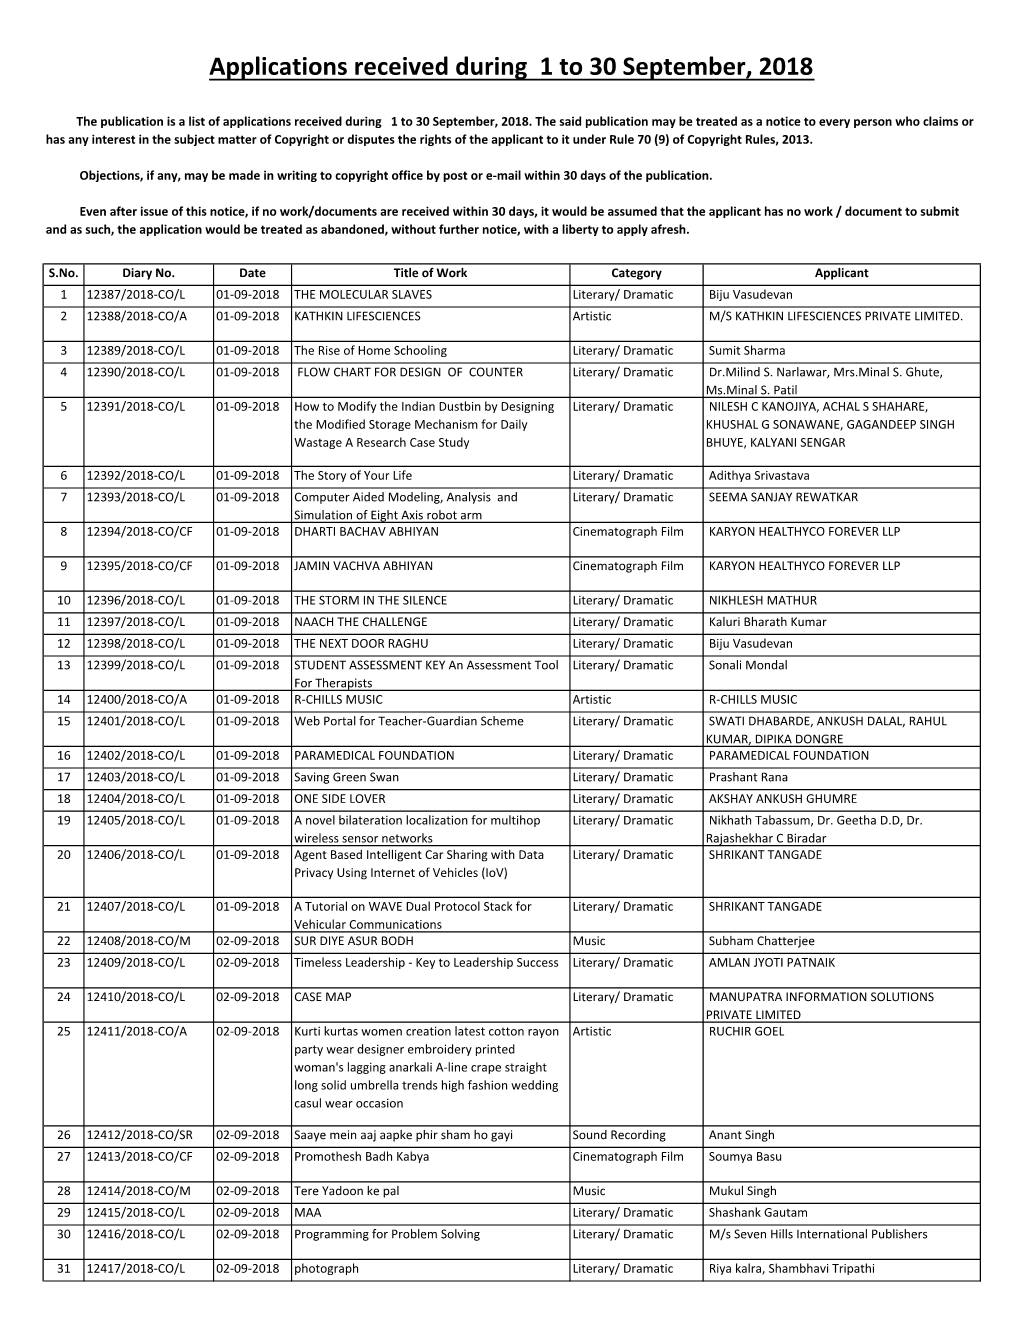 Applications Received During 1 to 30 September, 2018